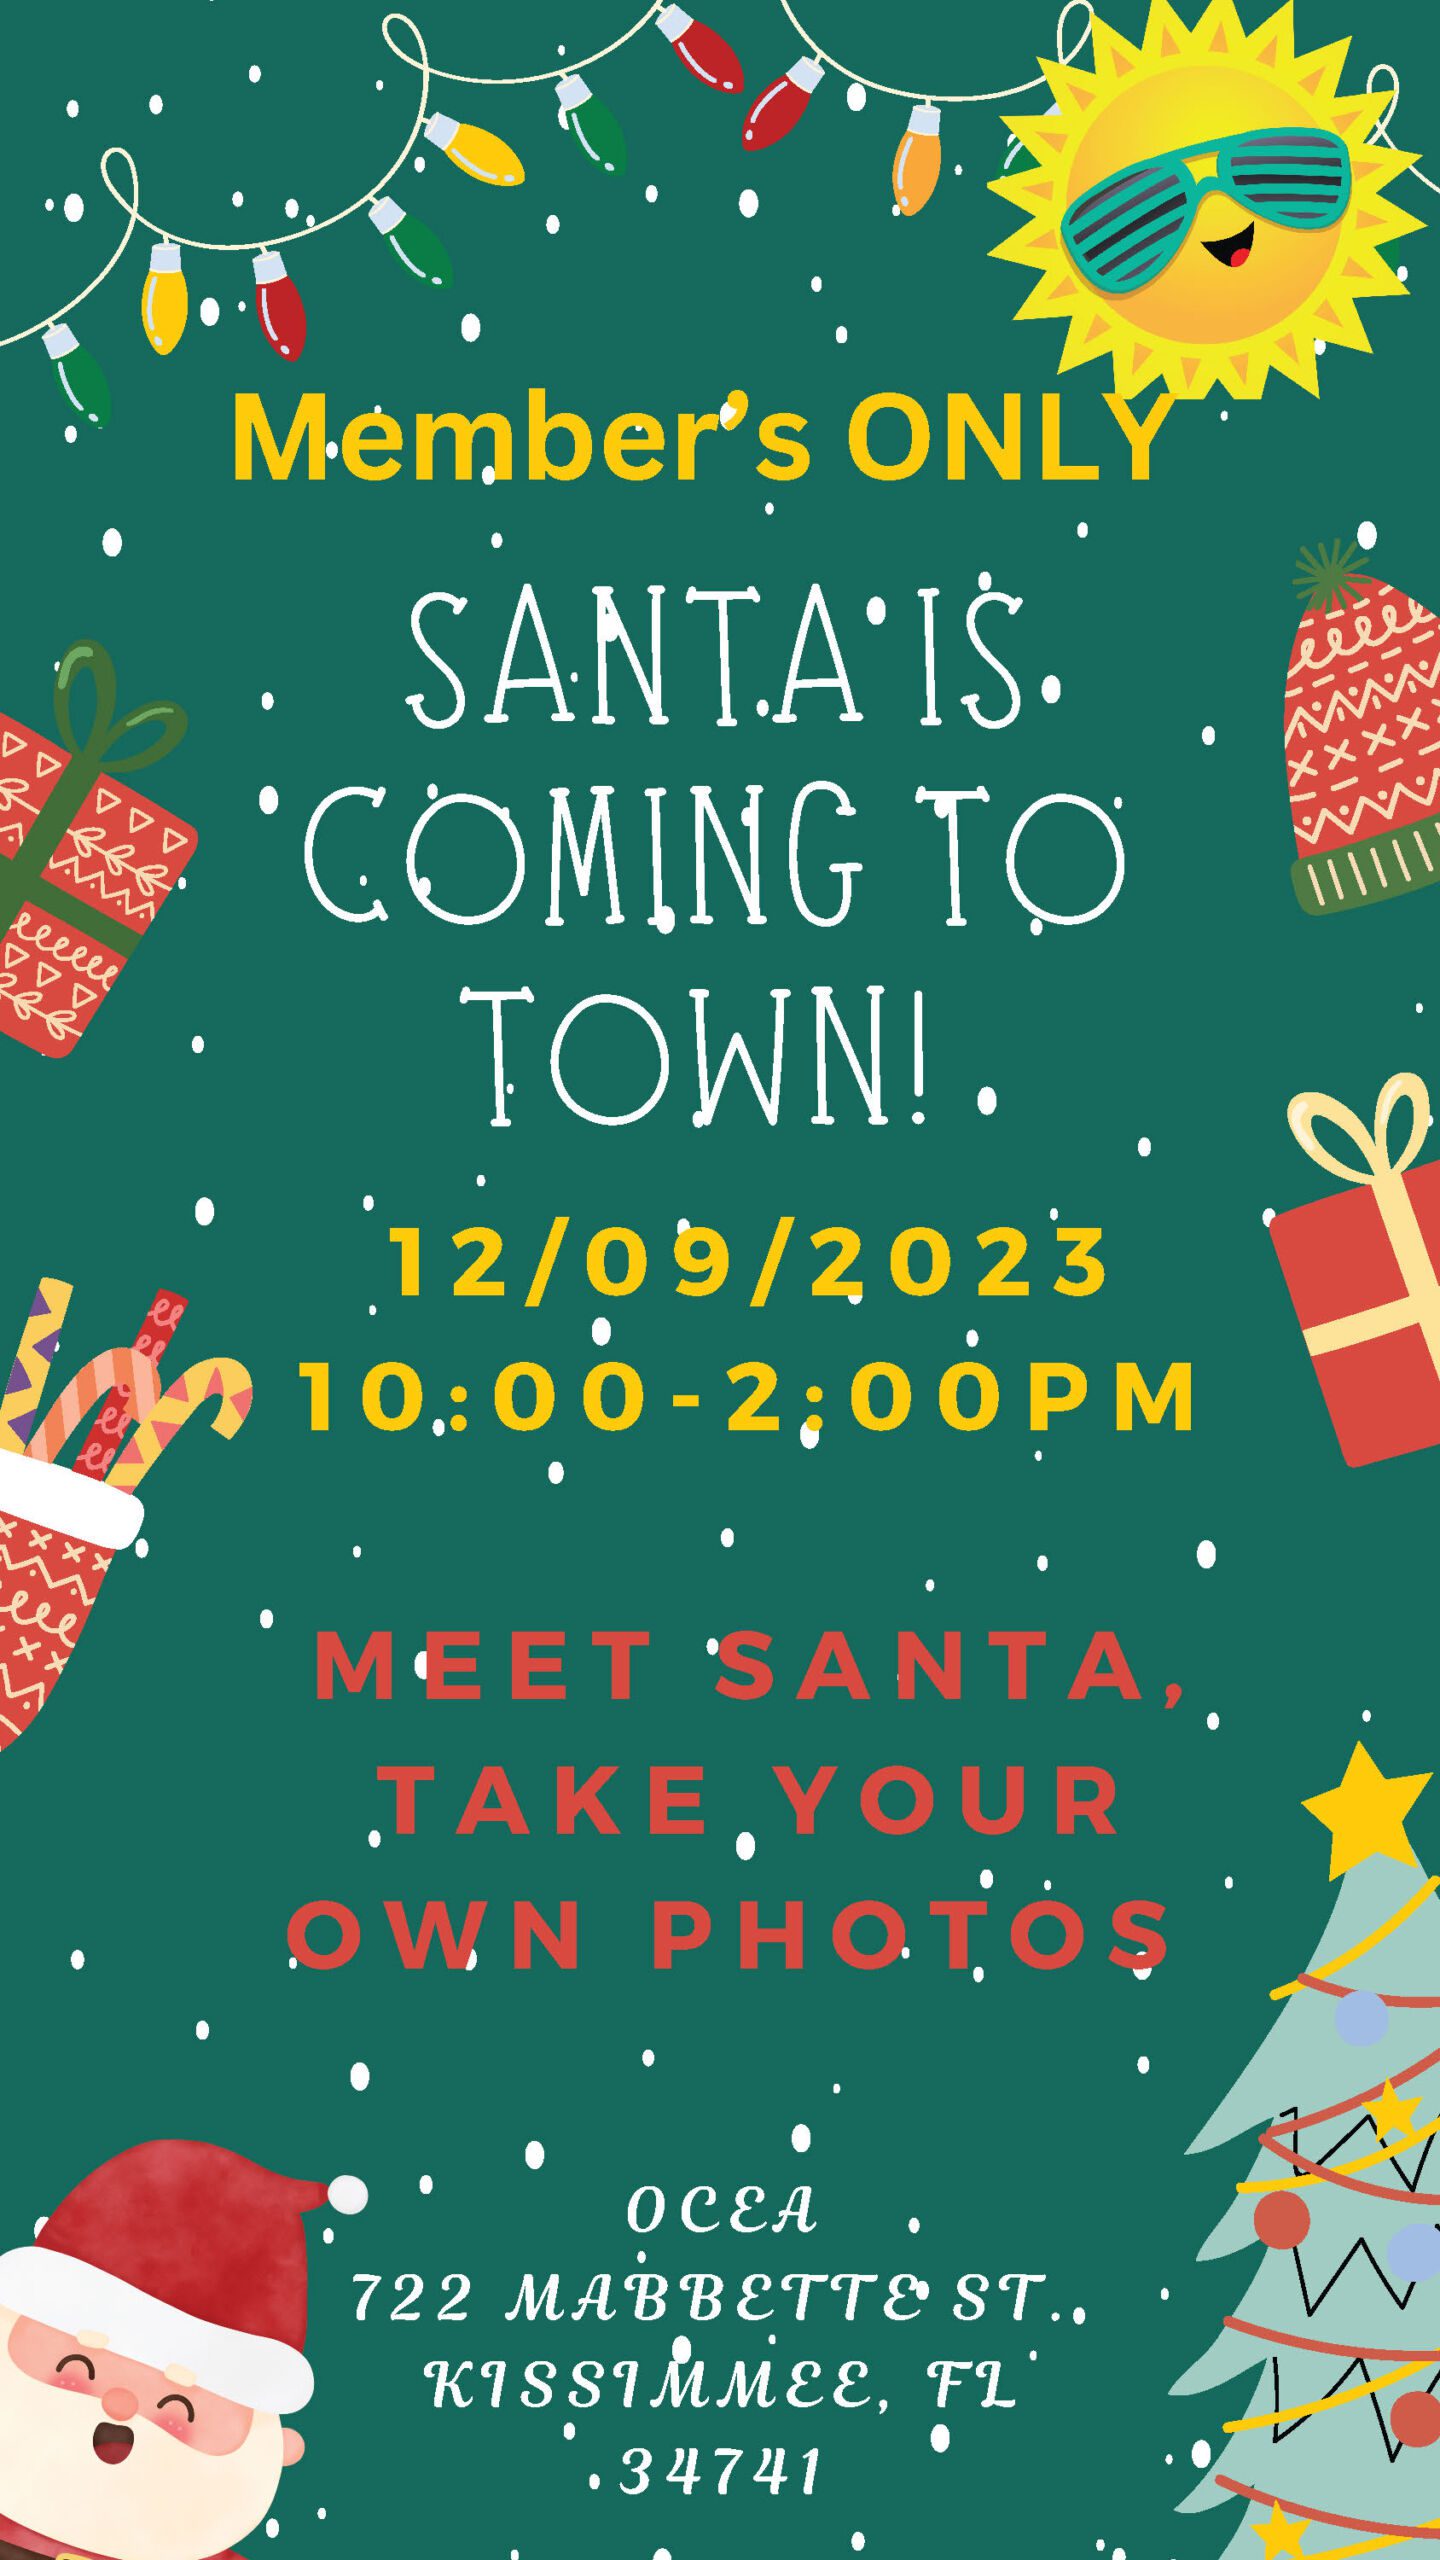 Santa is coming to town holiday invite